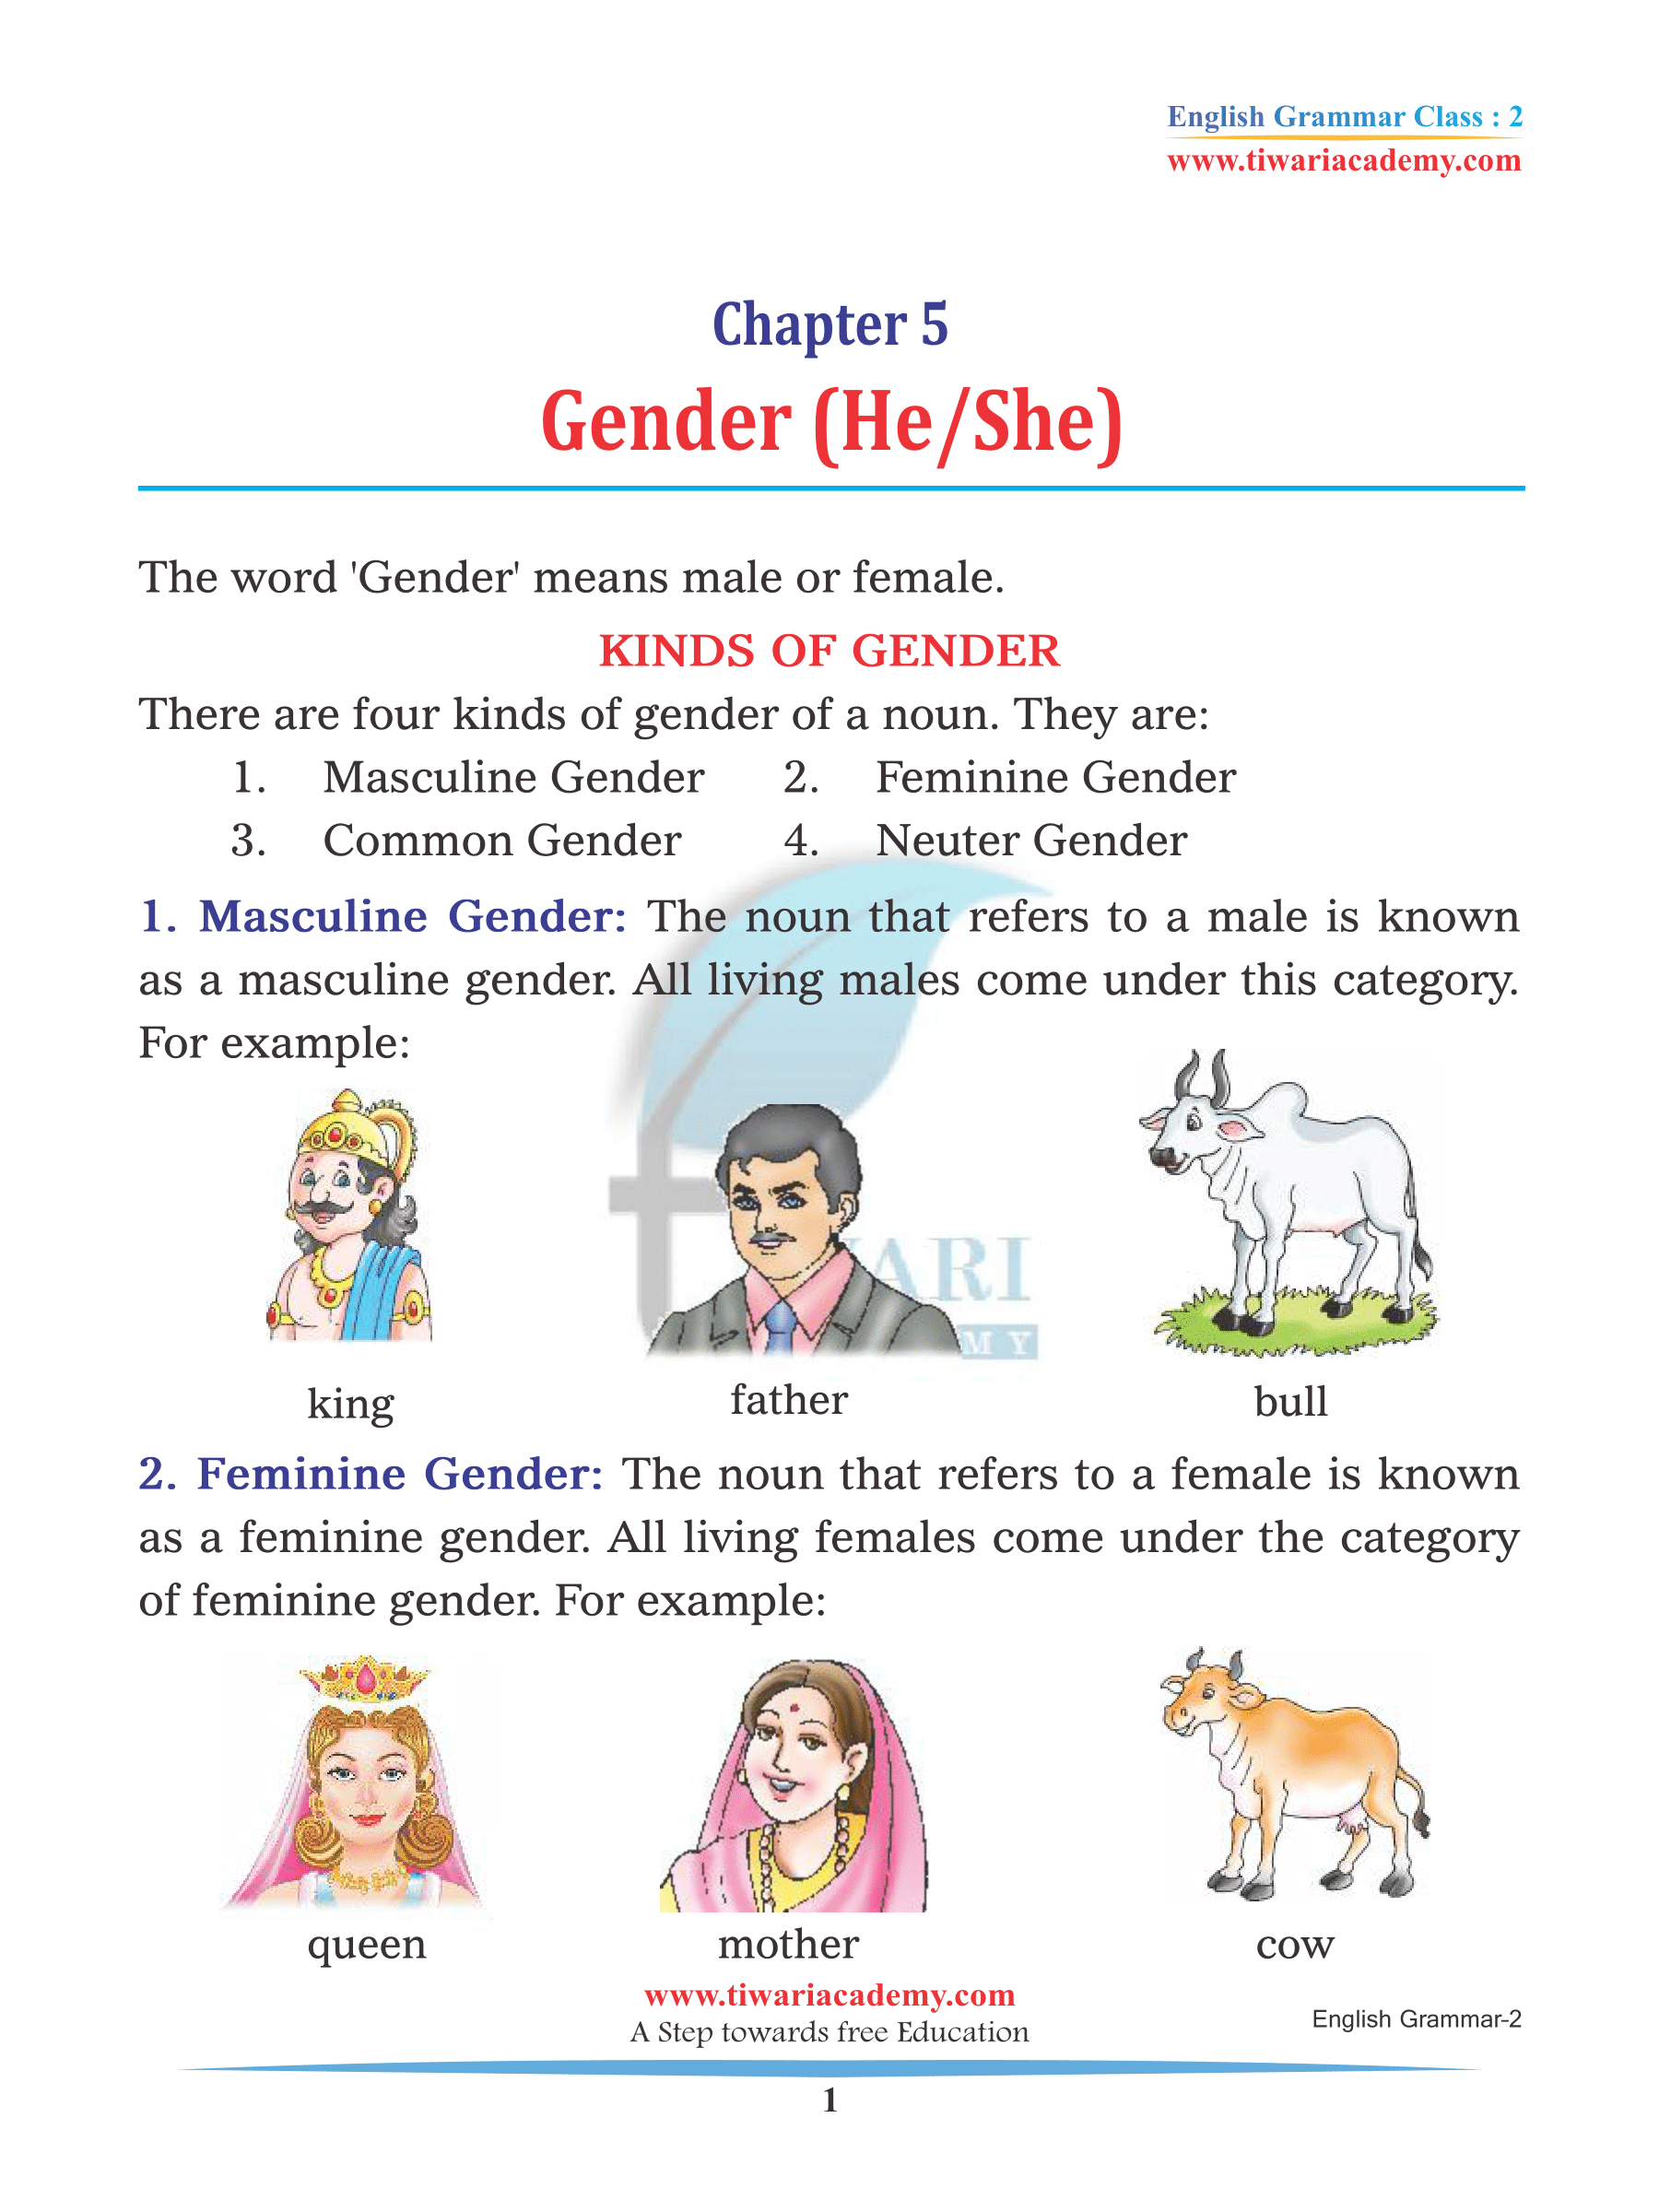 Class 2 English Grammar Chapter 5 Gender and its four kinds PDF.